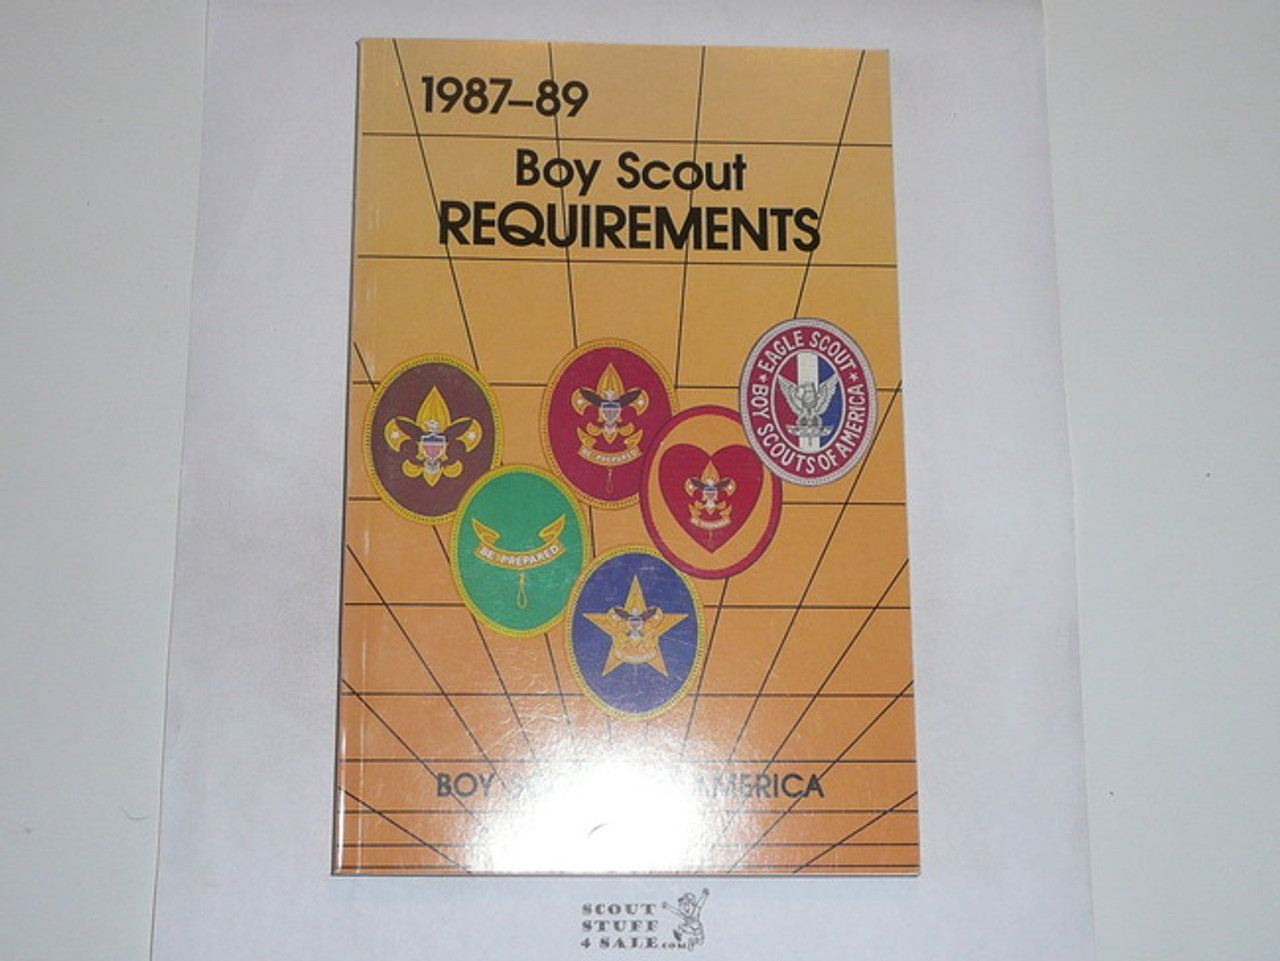 1987-1989 Boy Scout Requirements Book, 6-88 Printing